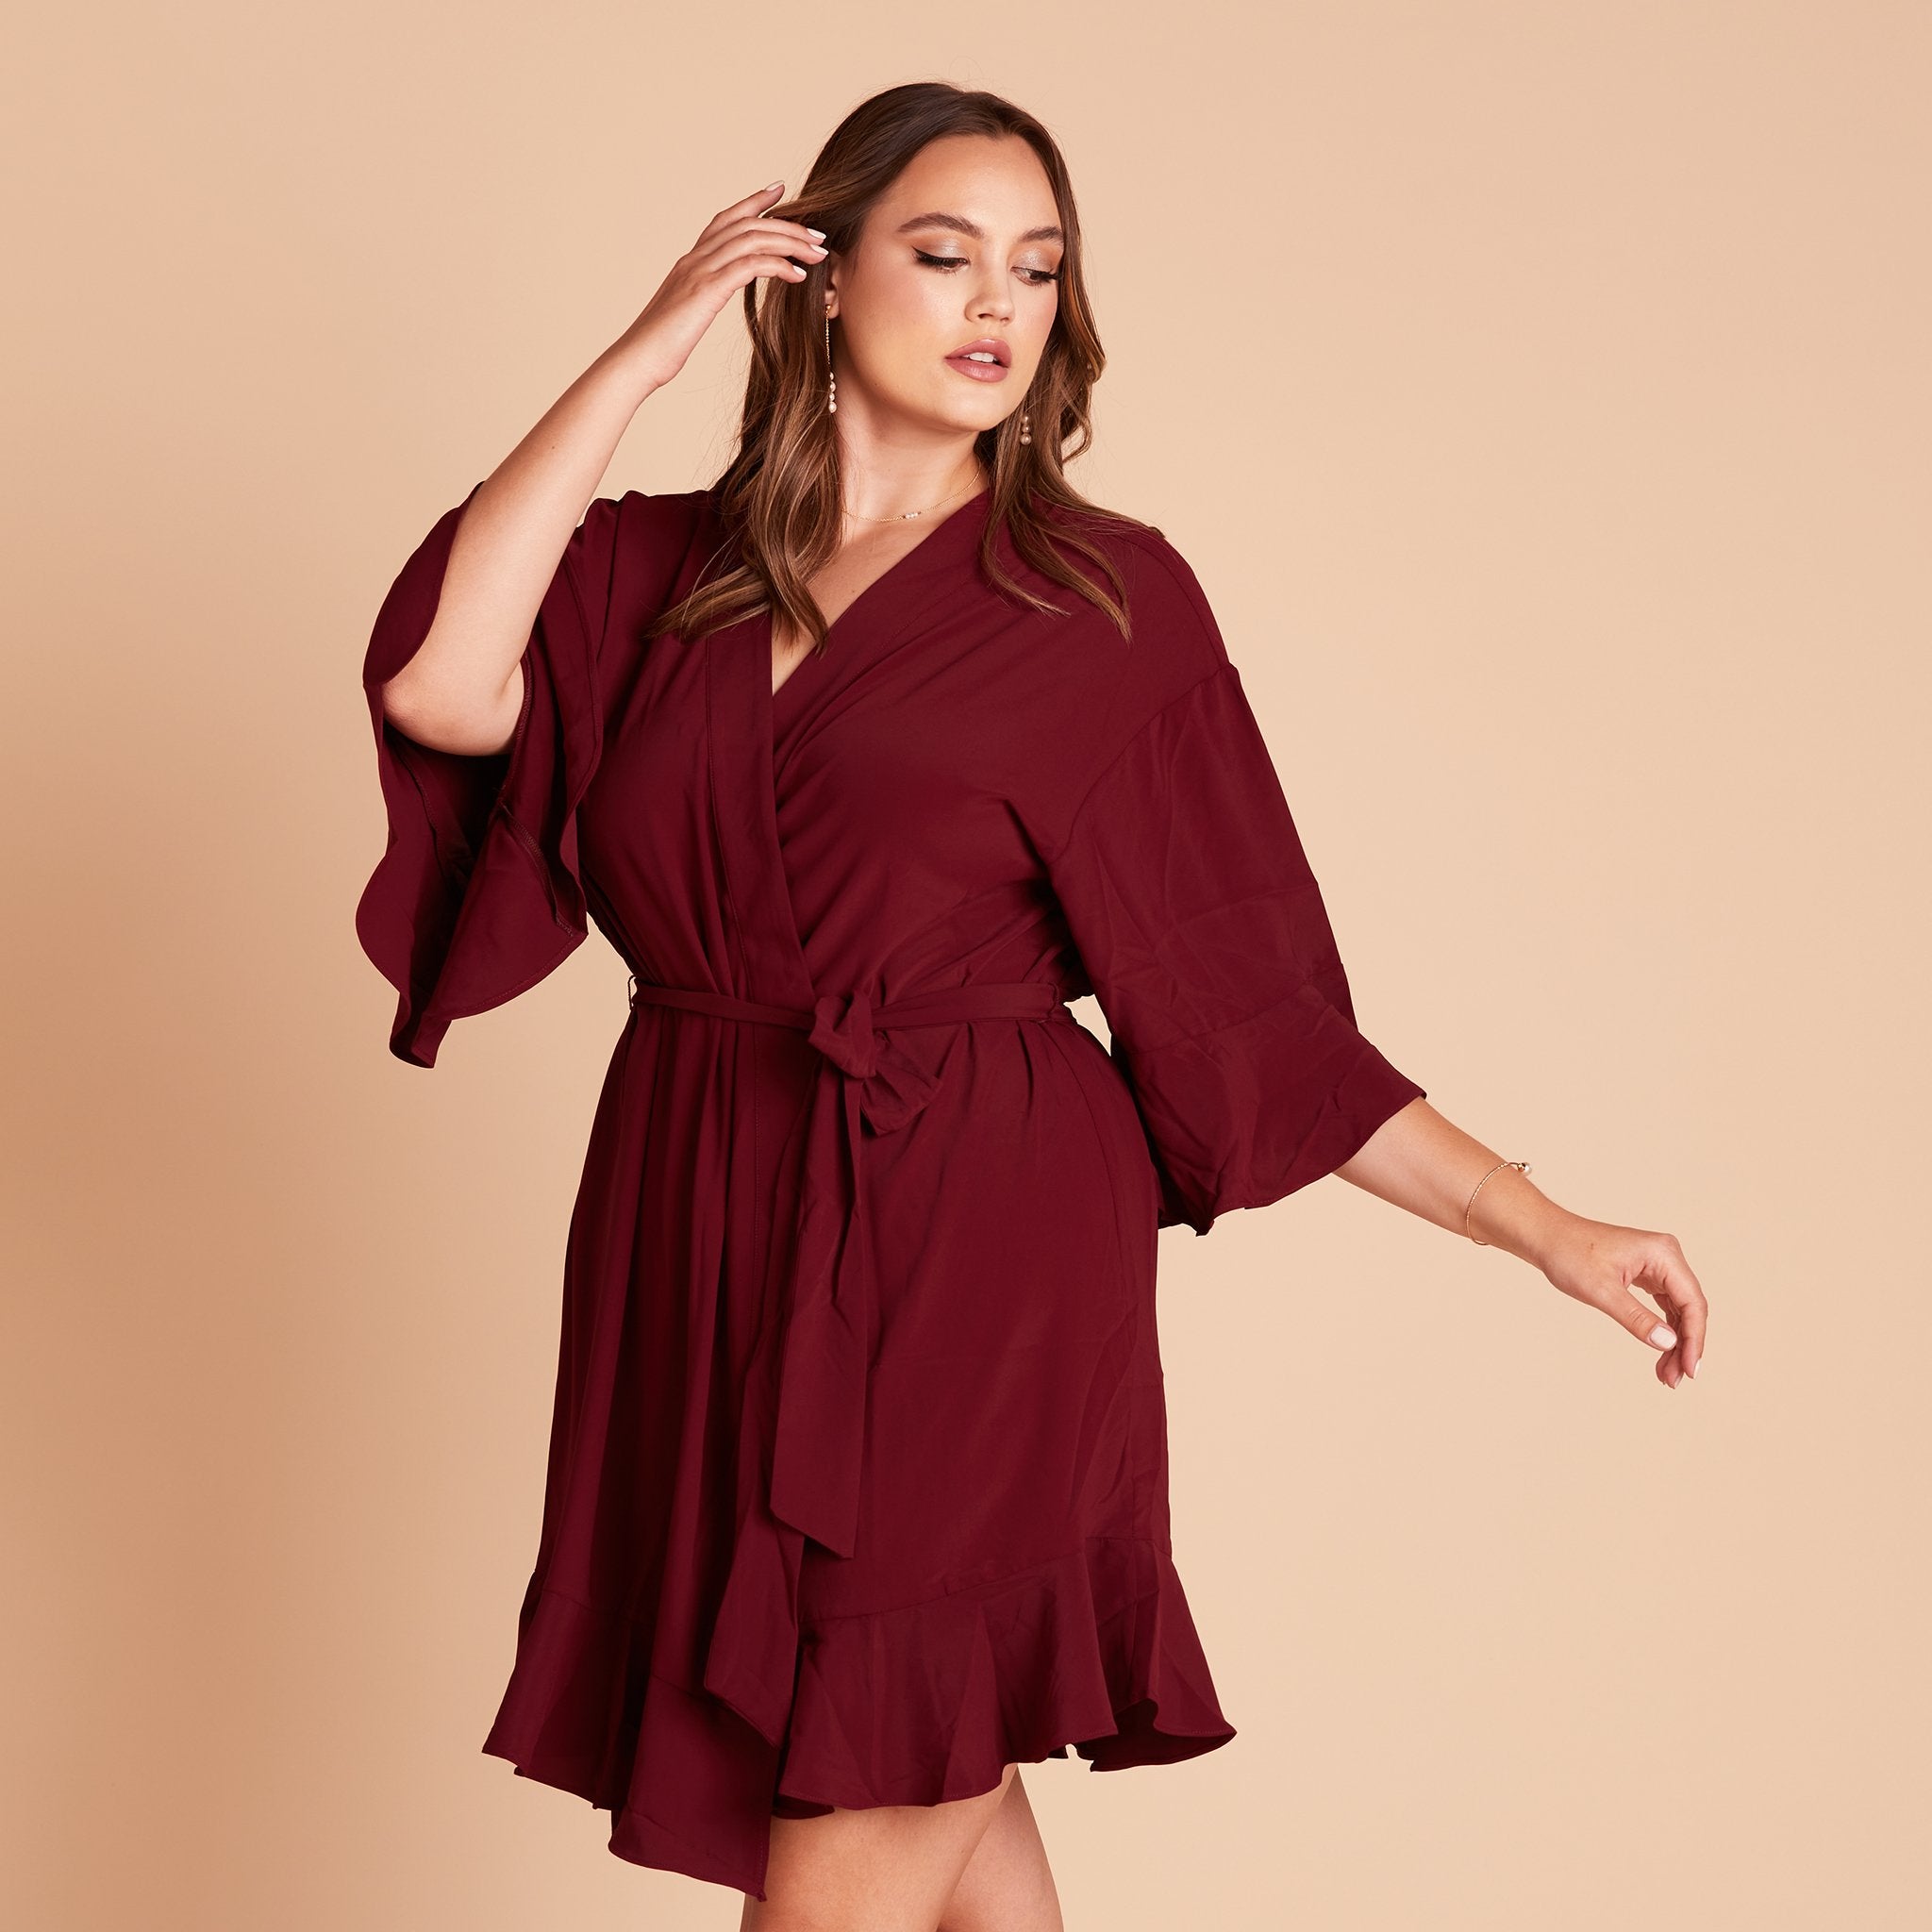 Kenny Ruffle Robe in cabernet burgundy by Birdy Grey, front view